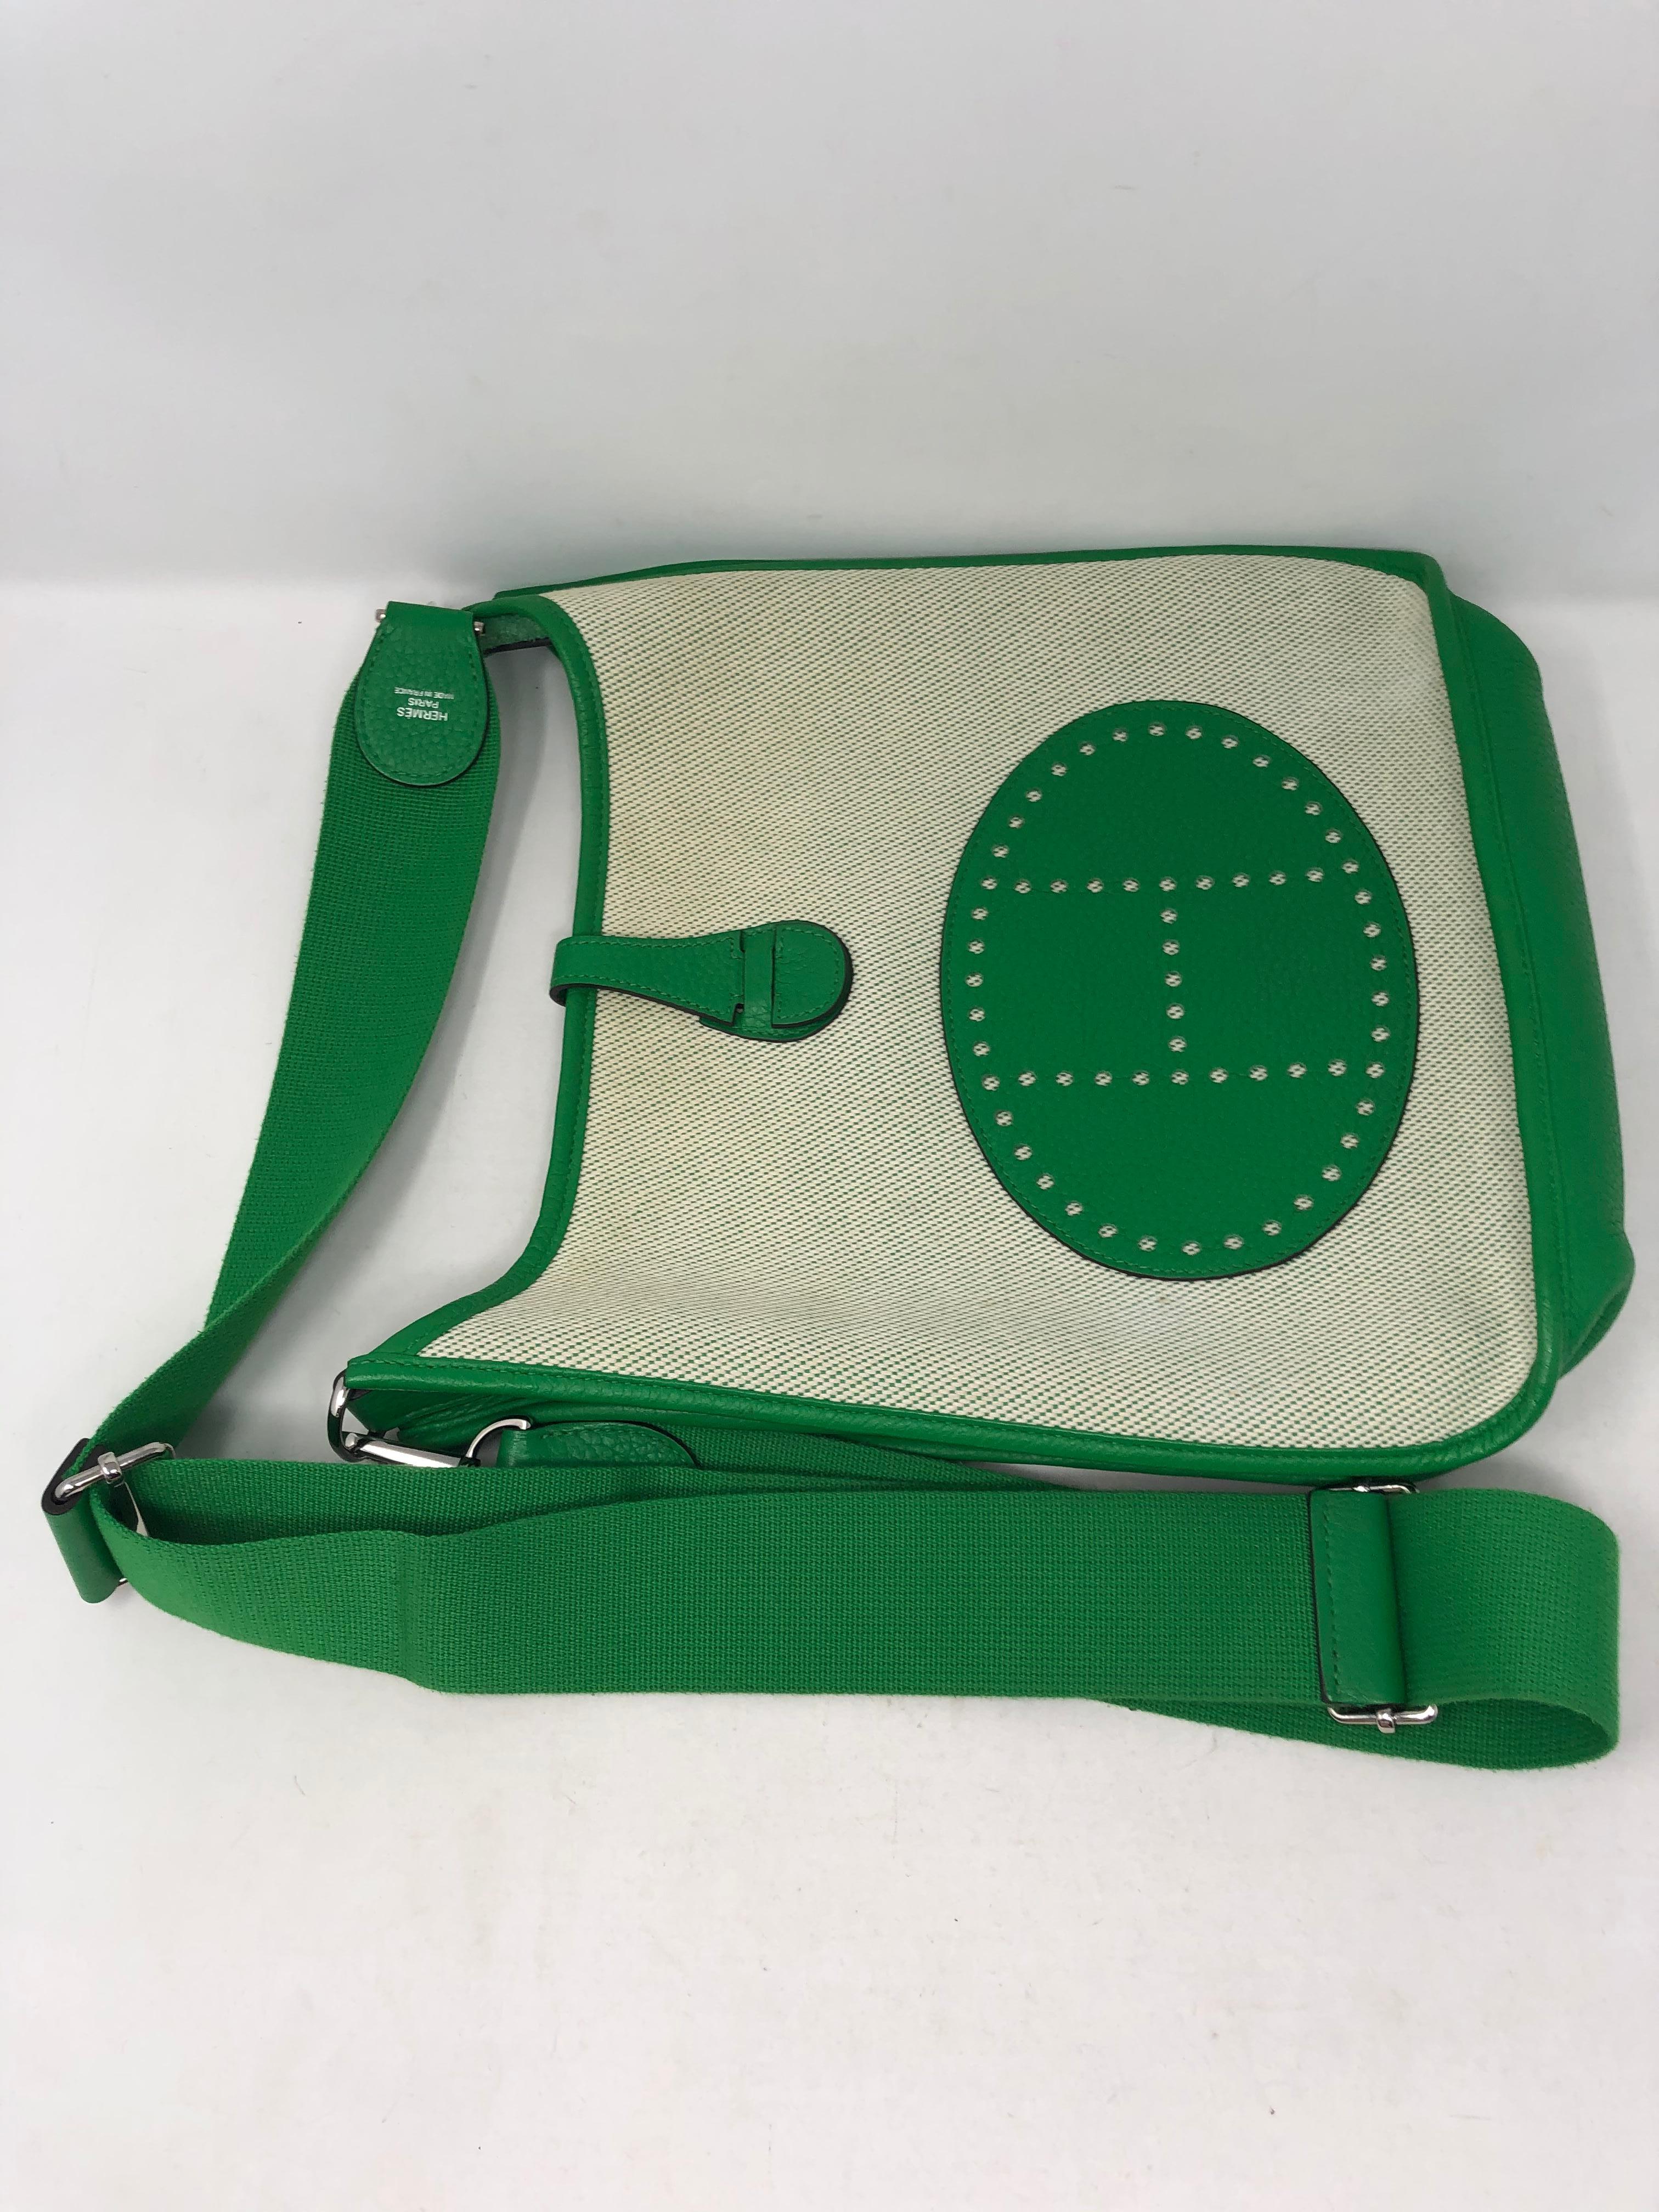 Hermes Green and Canvas Evelyne Crossbody Bag. Mint condition. Rare two-tone bag. GM size with adjustable strap. Newer series bag. Leather interior and trim in green leather. Guaranteed authentic. 